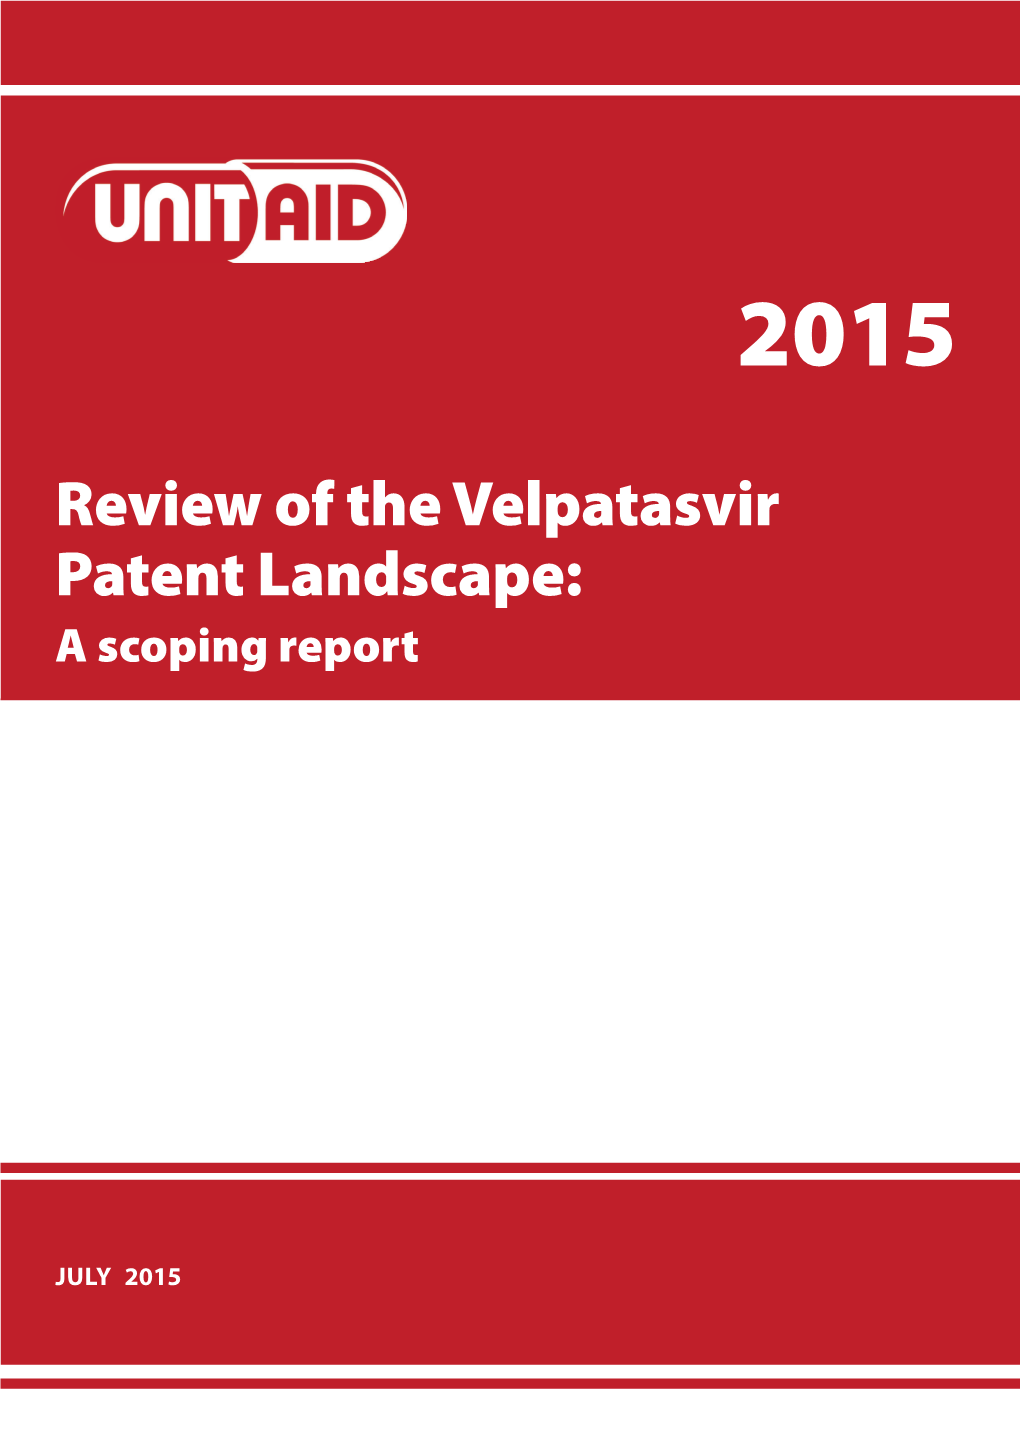 Review of the Velpatasvir Patent Landscape: a Scoping Report